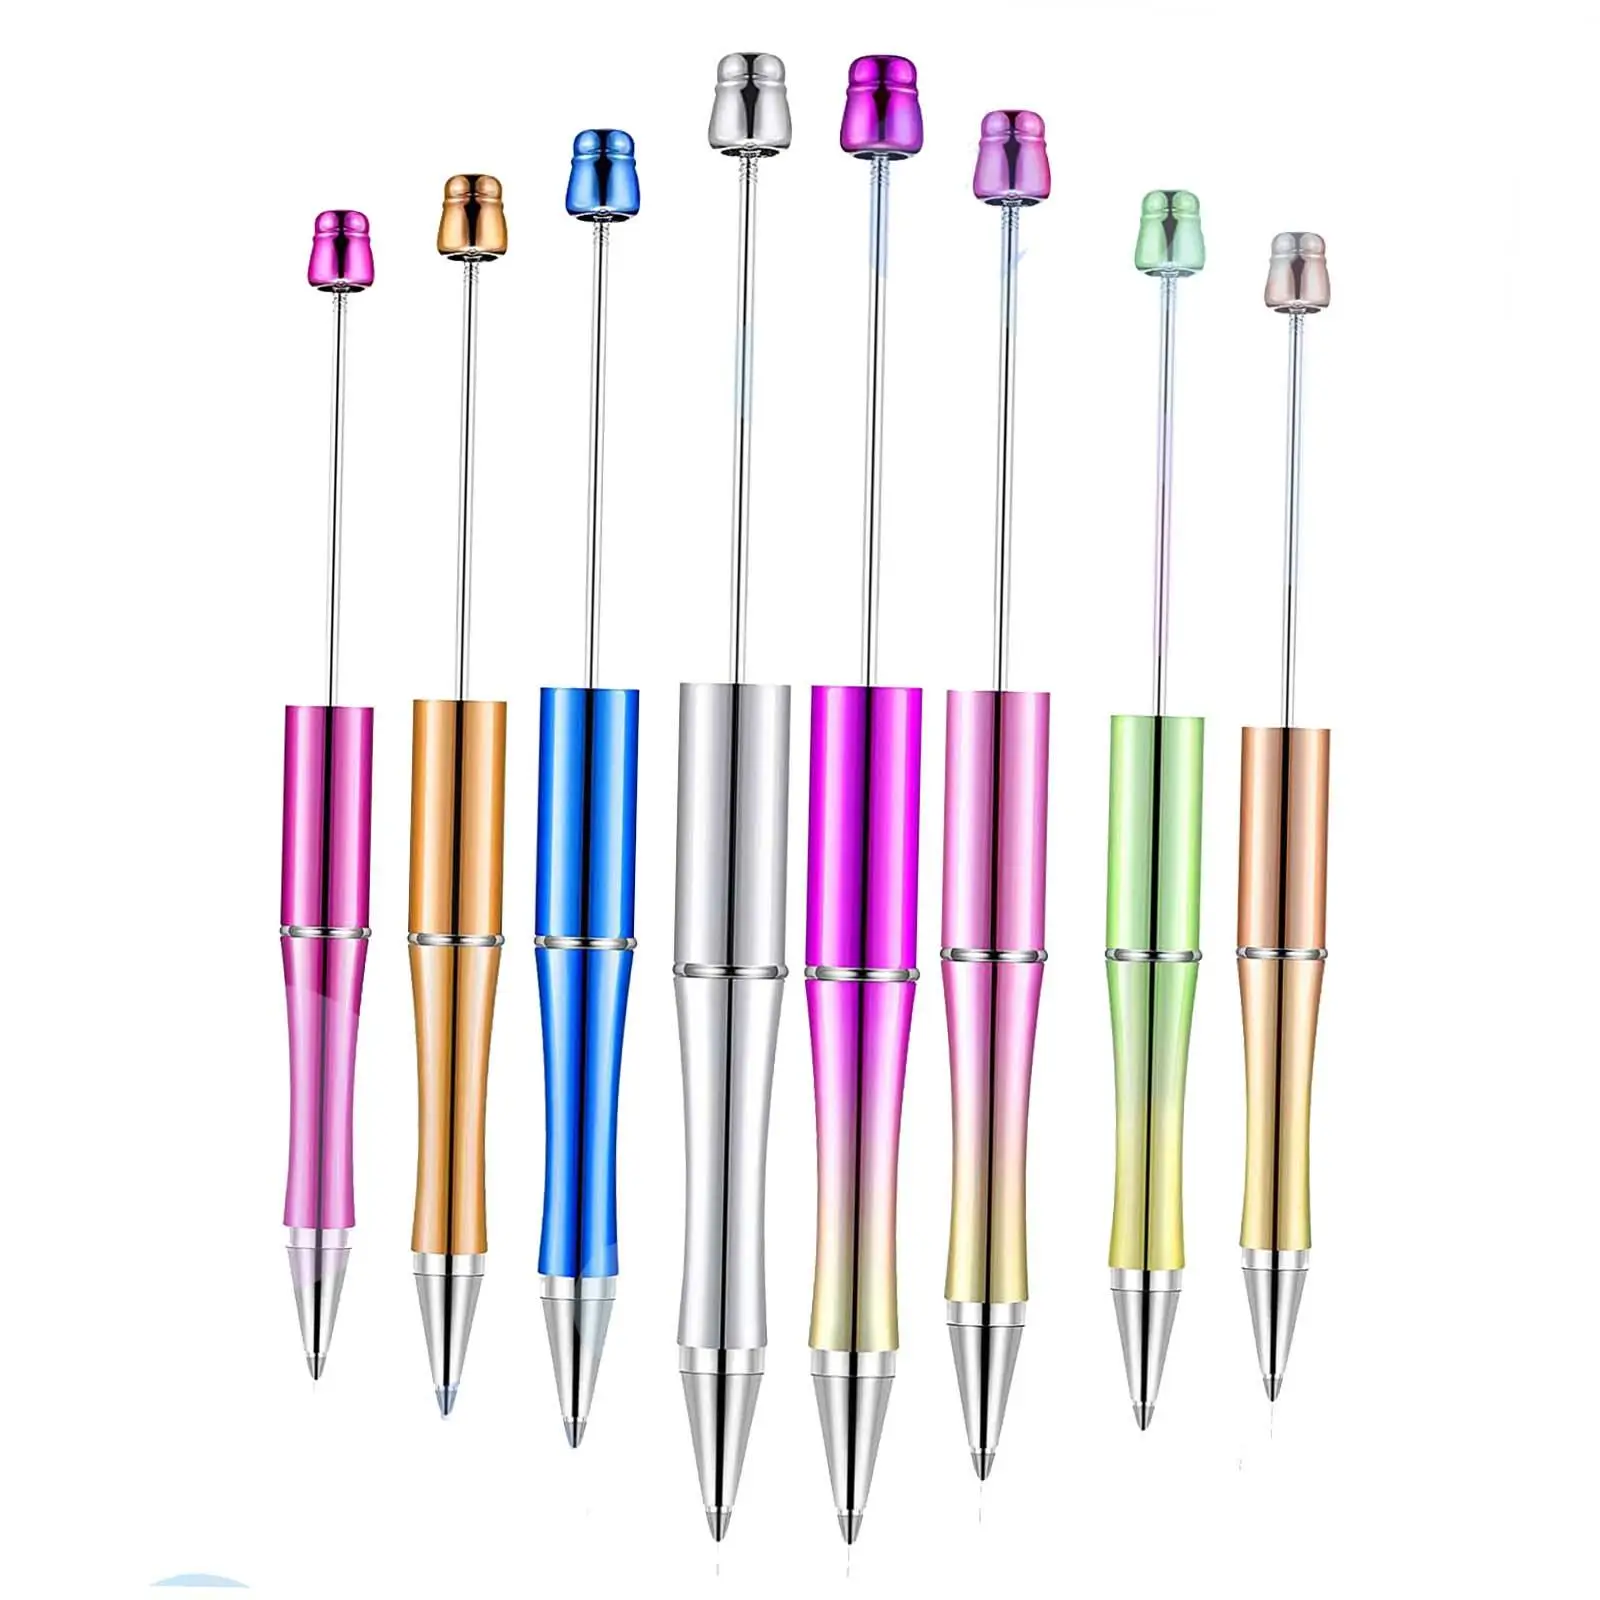 

8Pcs Assorted Colors Bead Pens Printable Ball Pen DIY Art Drawing Ballpoint Pen for School Exam Spare Drawing Journaling Office